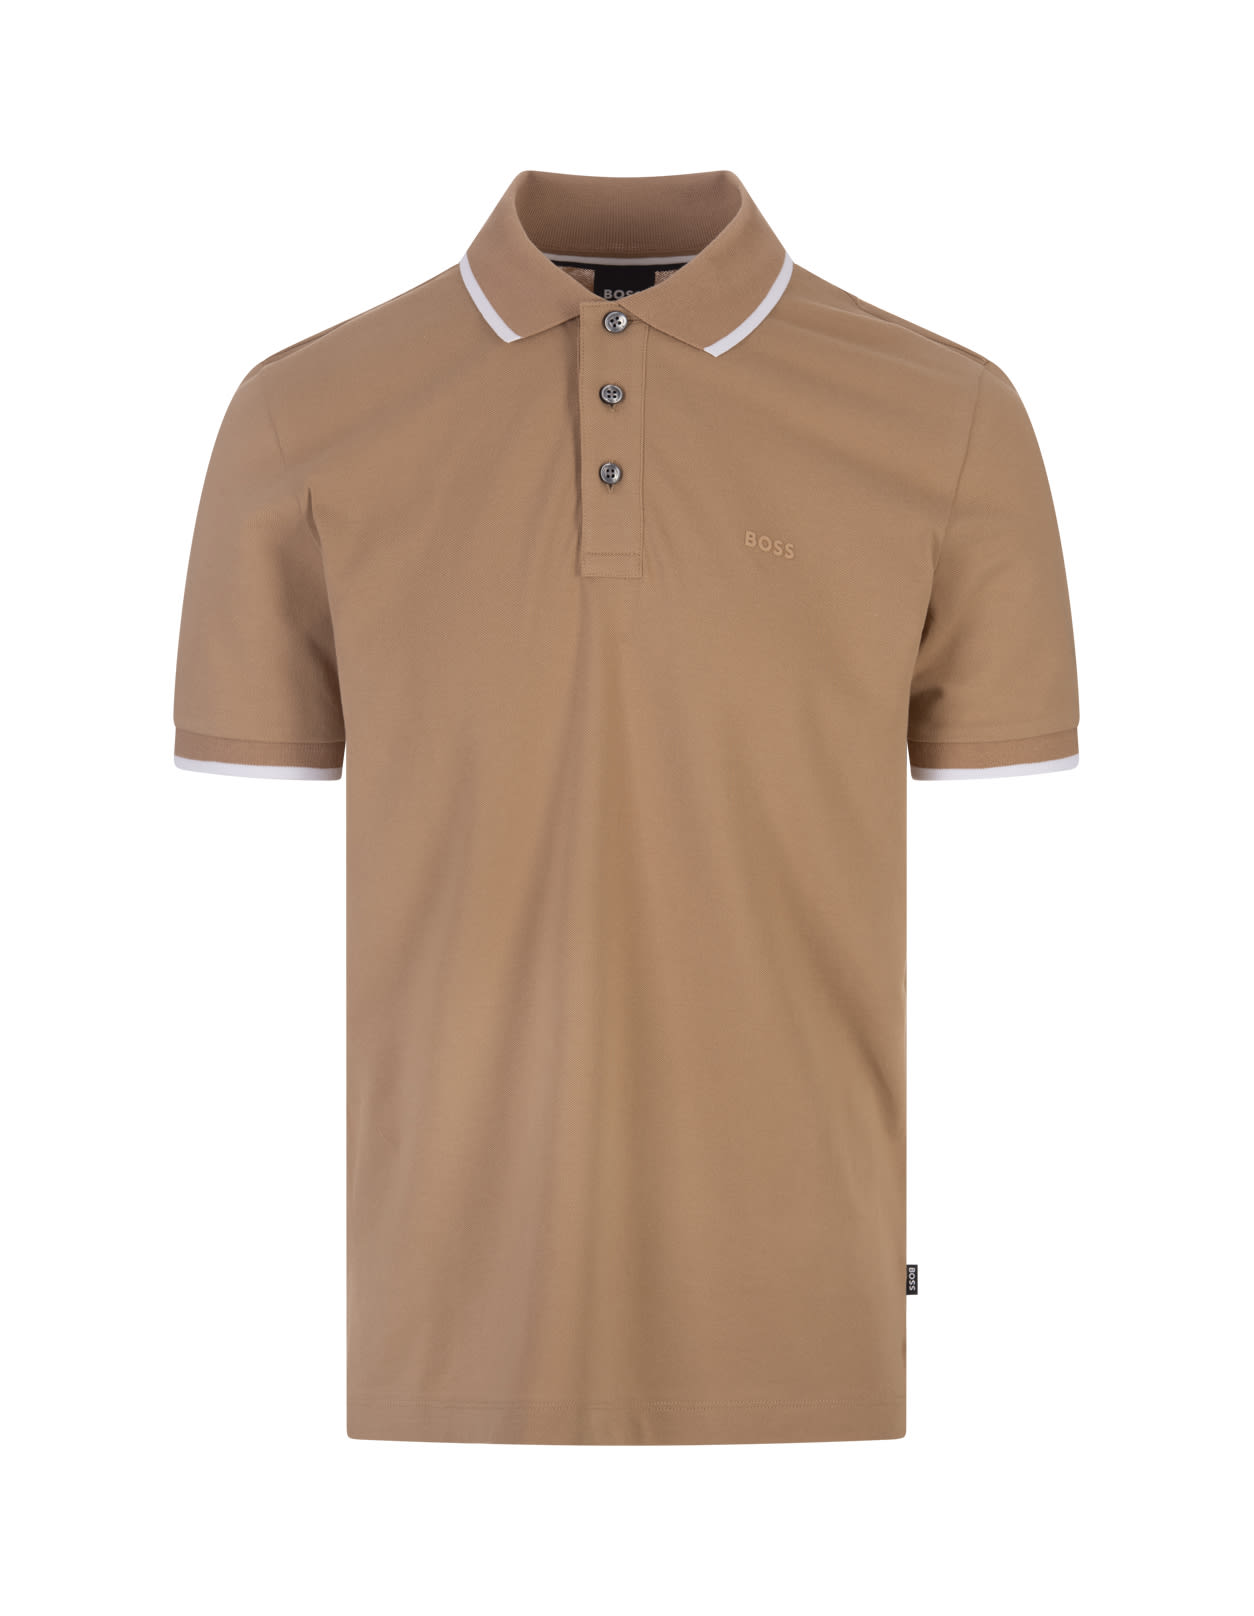 Beige Slim Fit Polo Shirt With Striped Collar